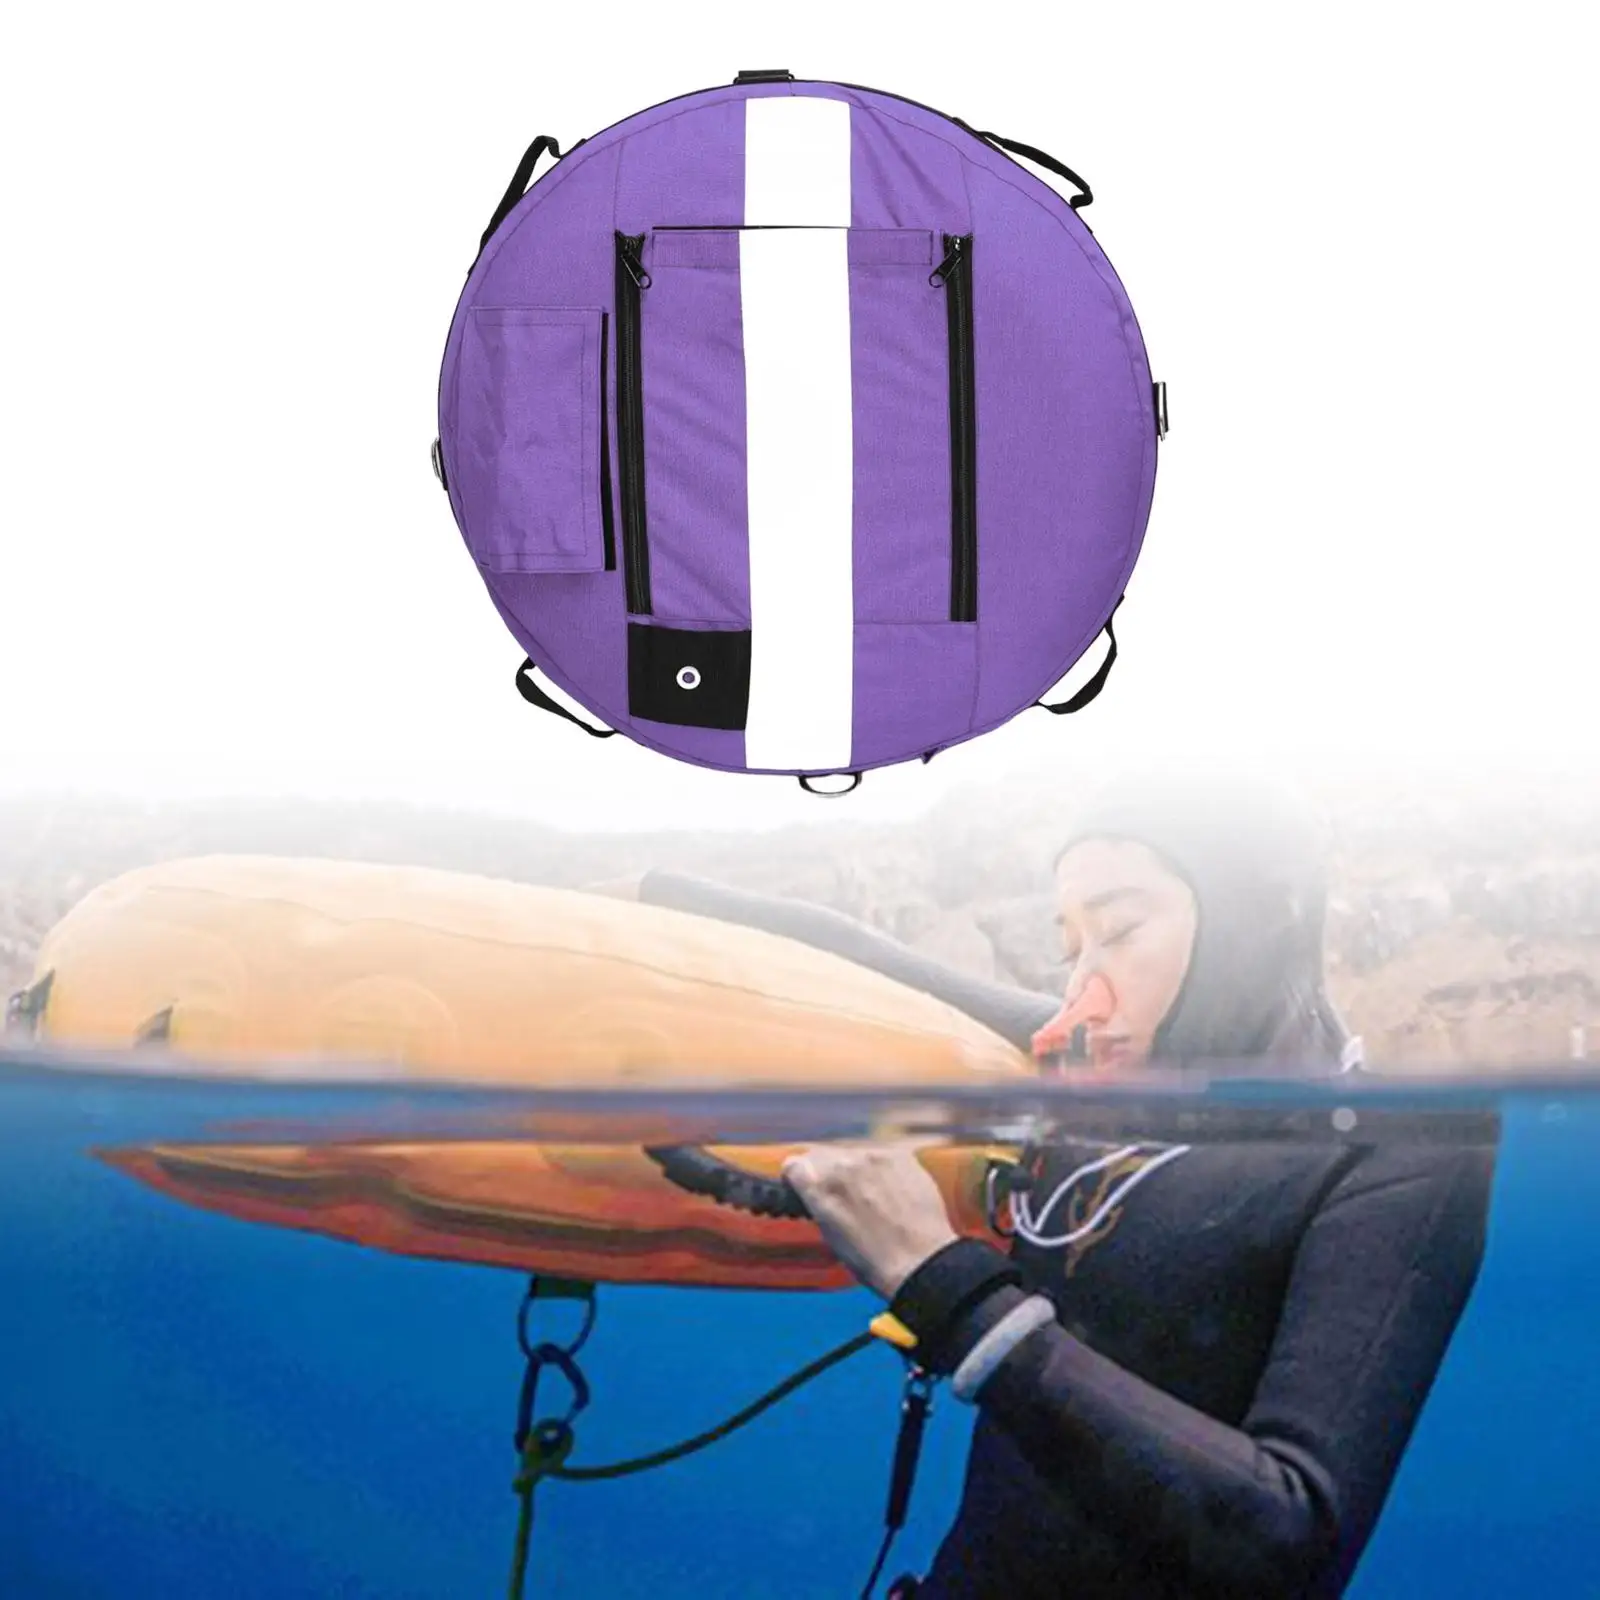 Freediving Buoy Float High Visibility Signal Inflation Marker Free Diving Float Marker for Rafting Boating Kayaking Fishing